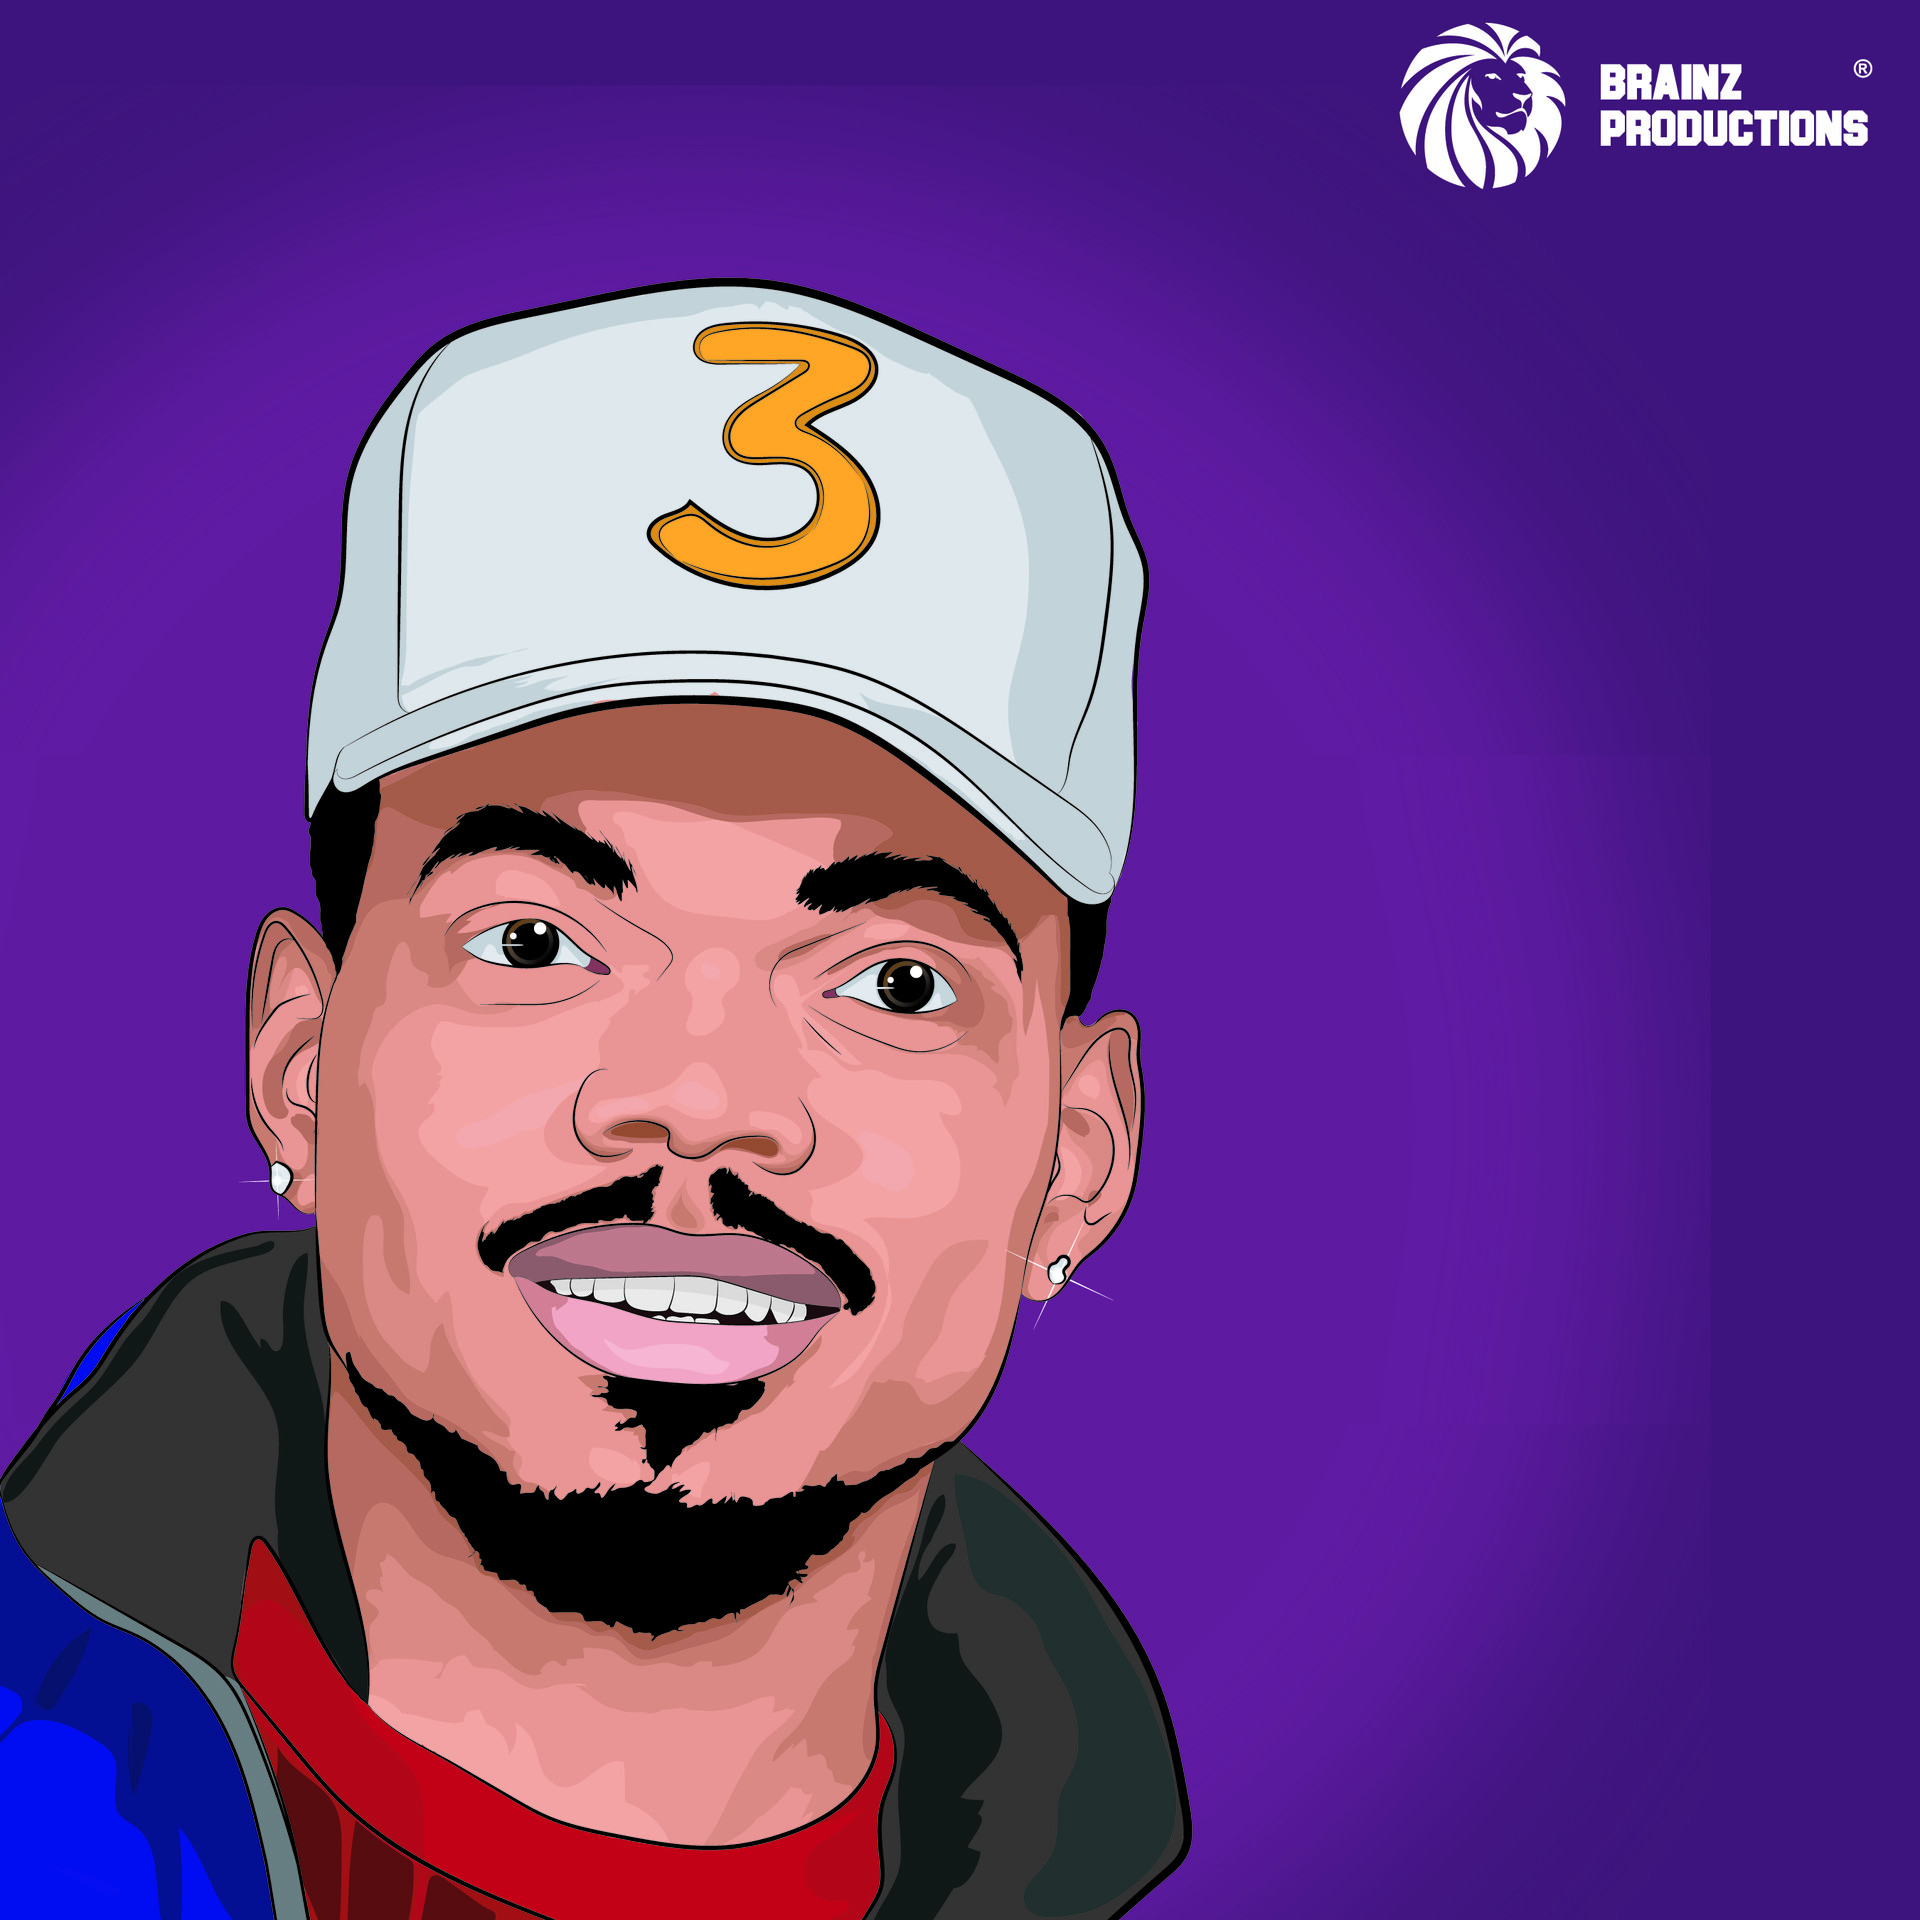 ArtStation - Cartoon picture of chance the rapper better than chiworld